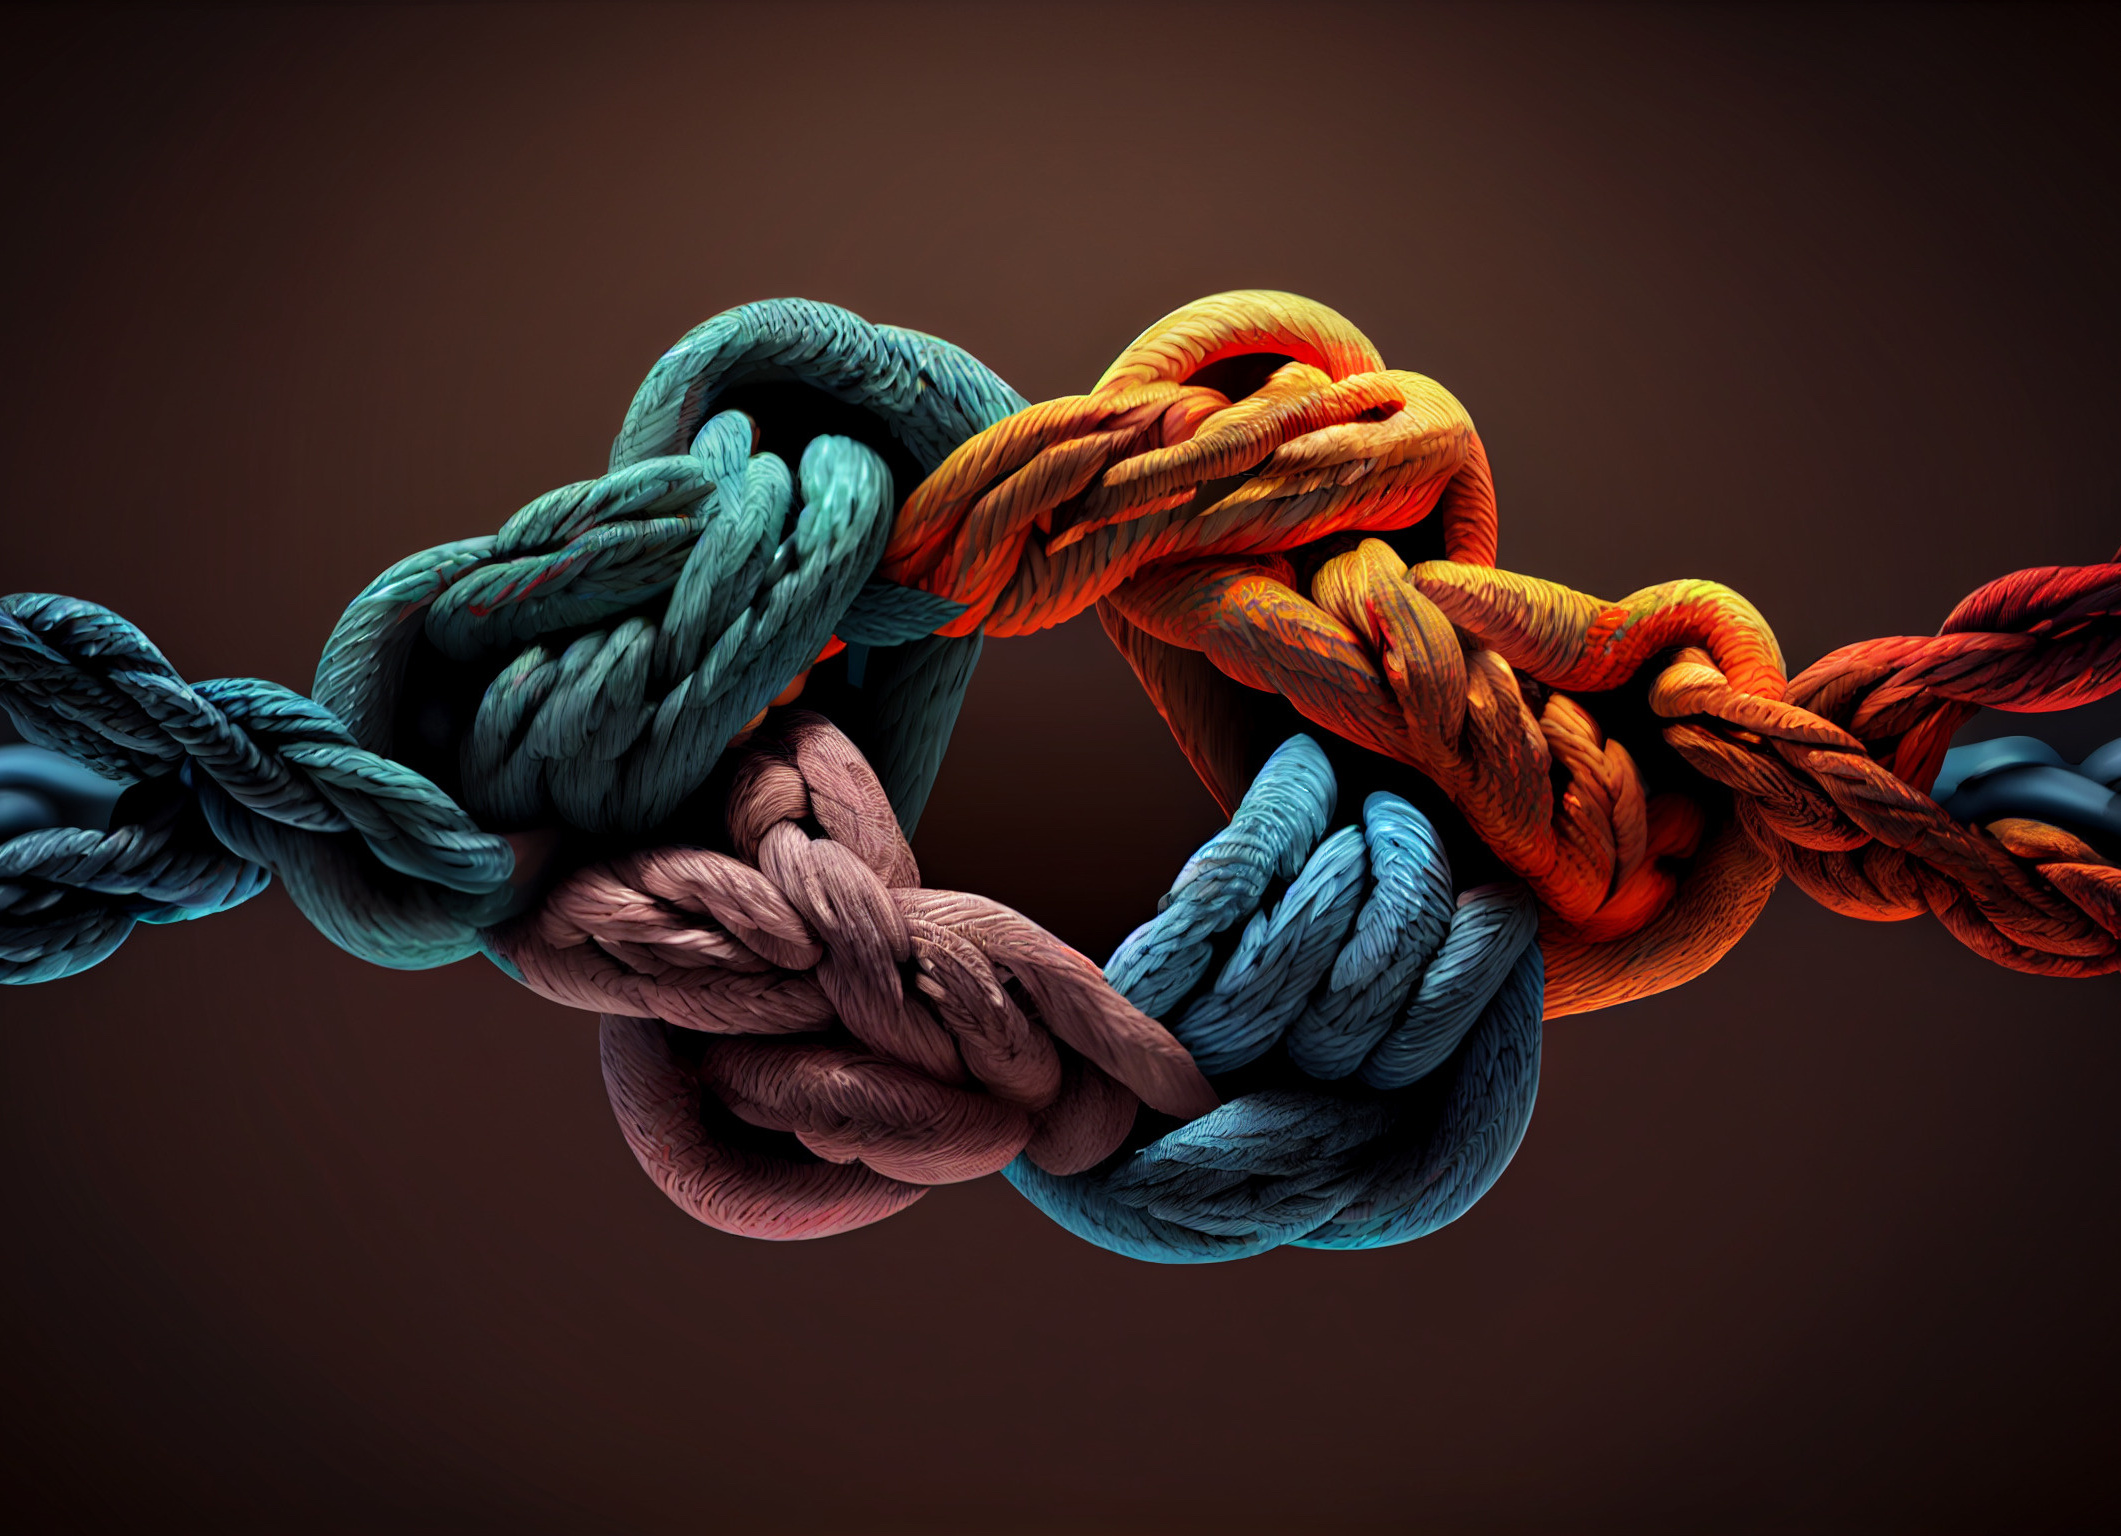 Ropes connecting together to represent the topic (durability and synergies) of the article